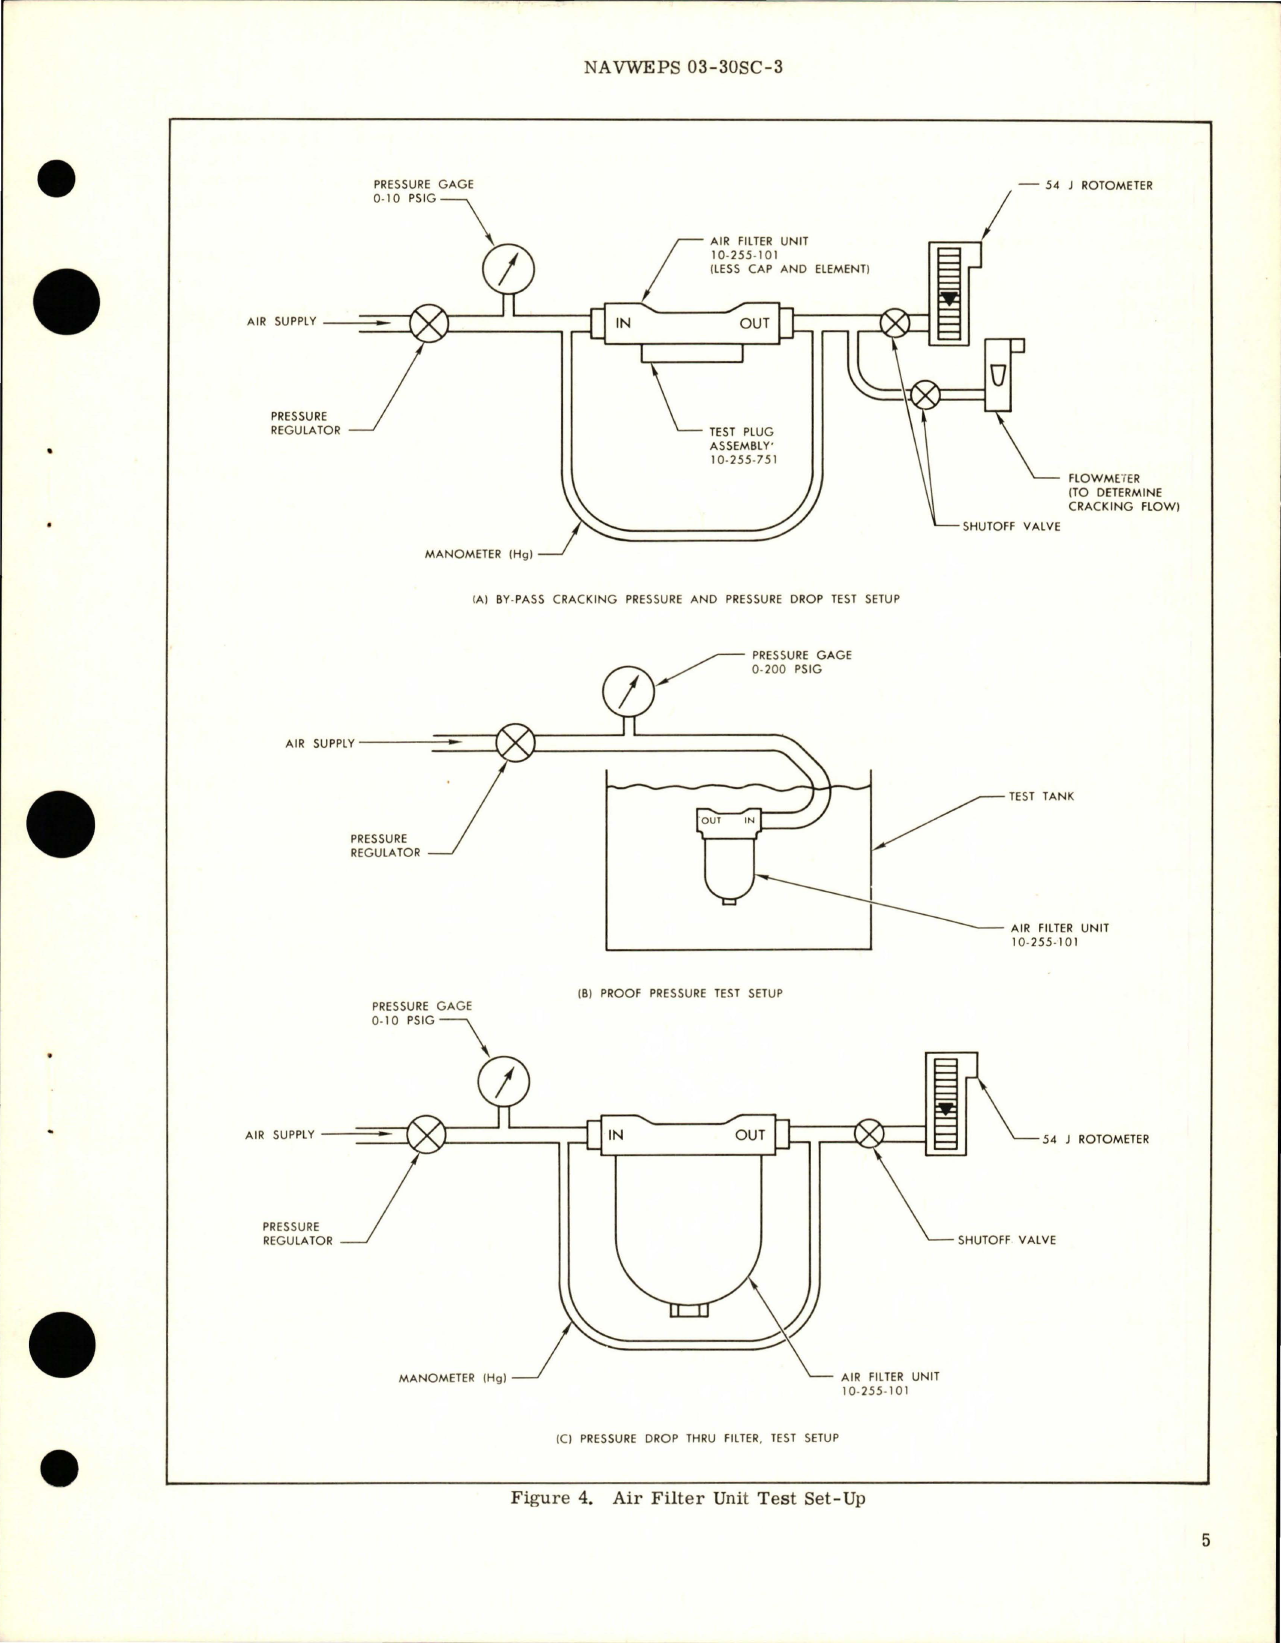 Sample page 5 from AirCorps Library document: Overhaul Instructions with Parts Breakdown for Air Filter Unit - Part 10-255-101